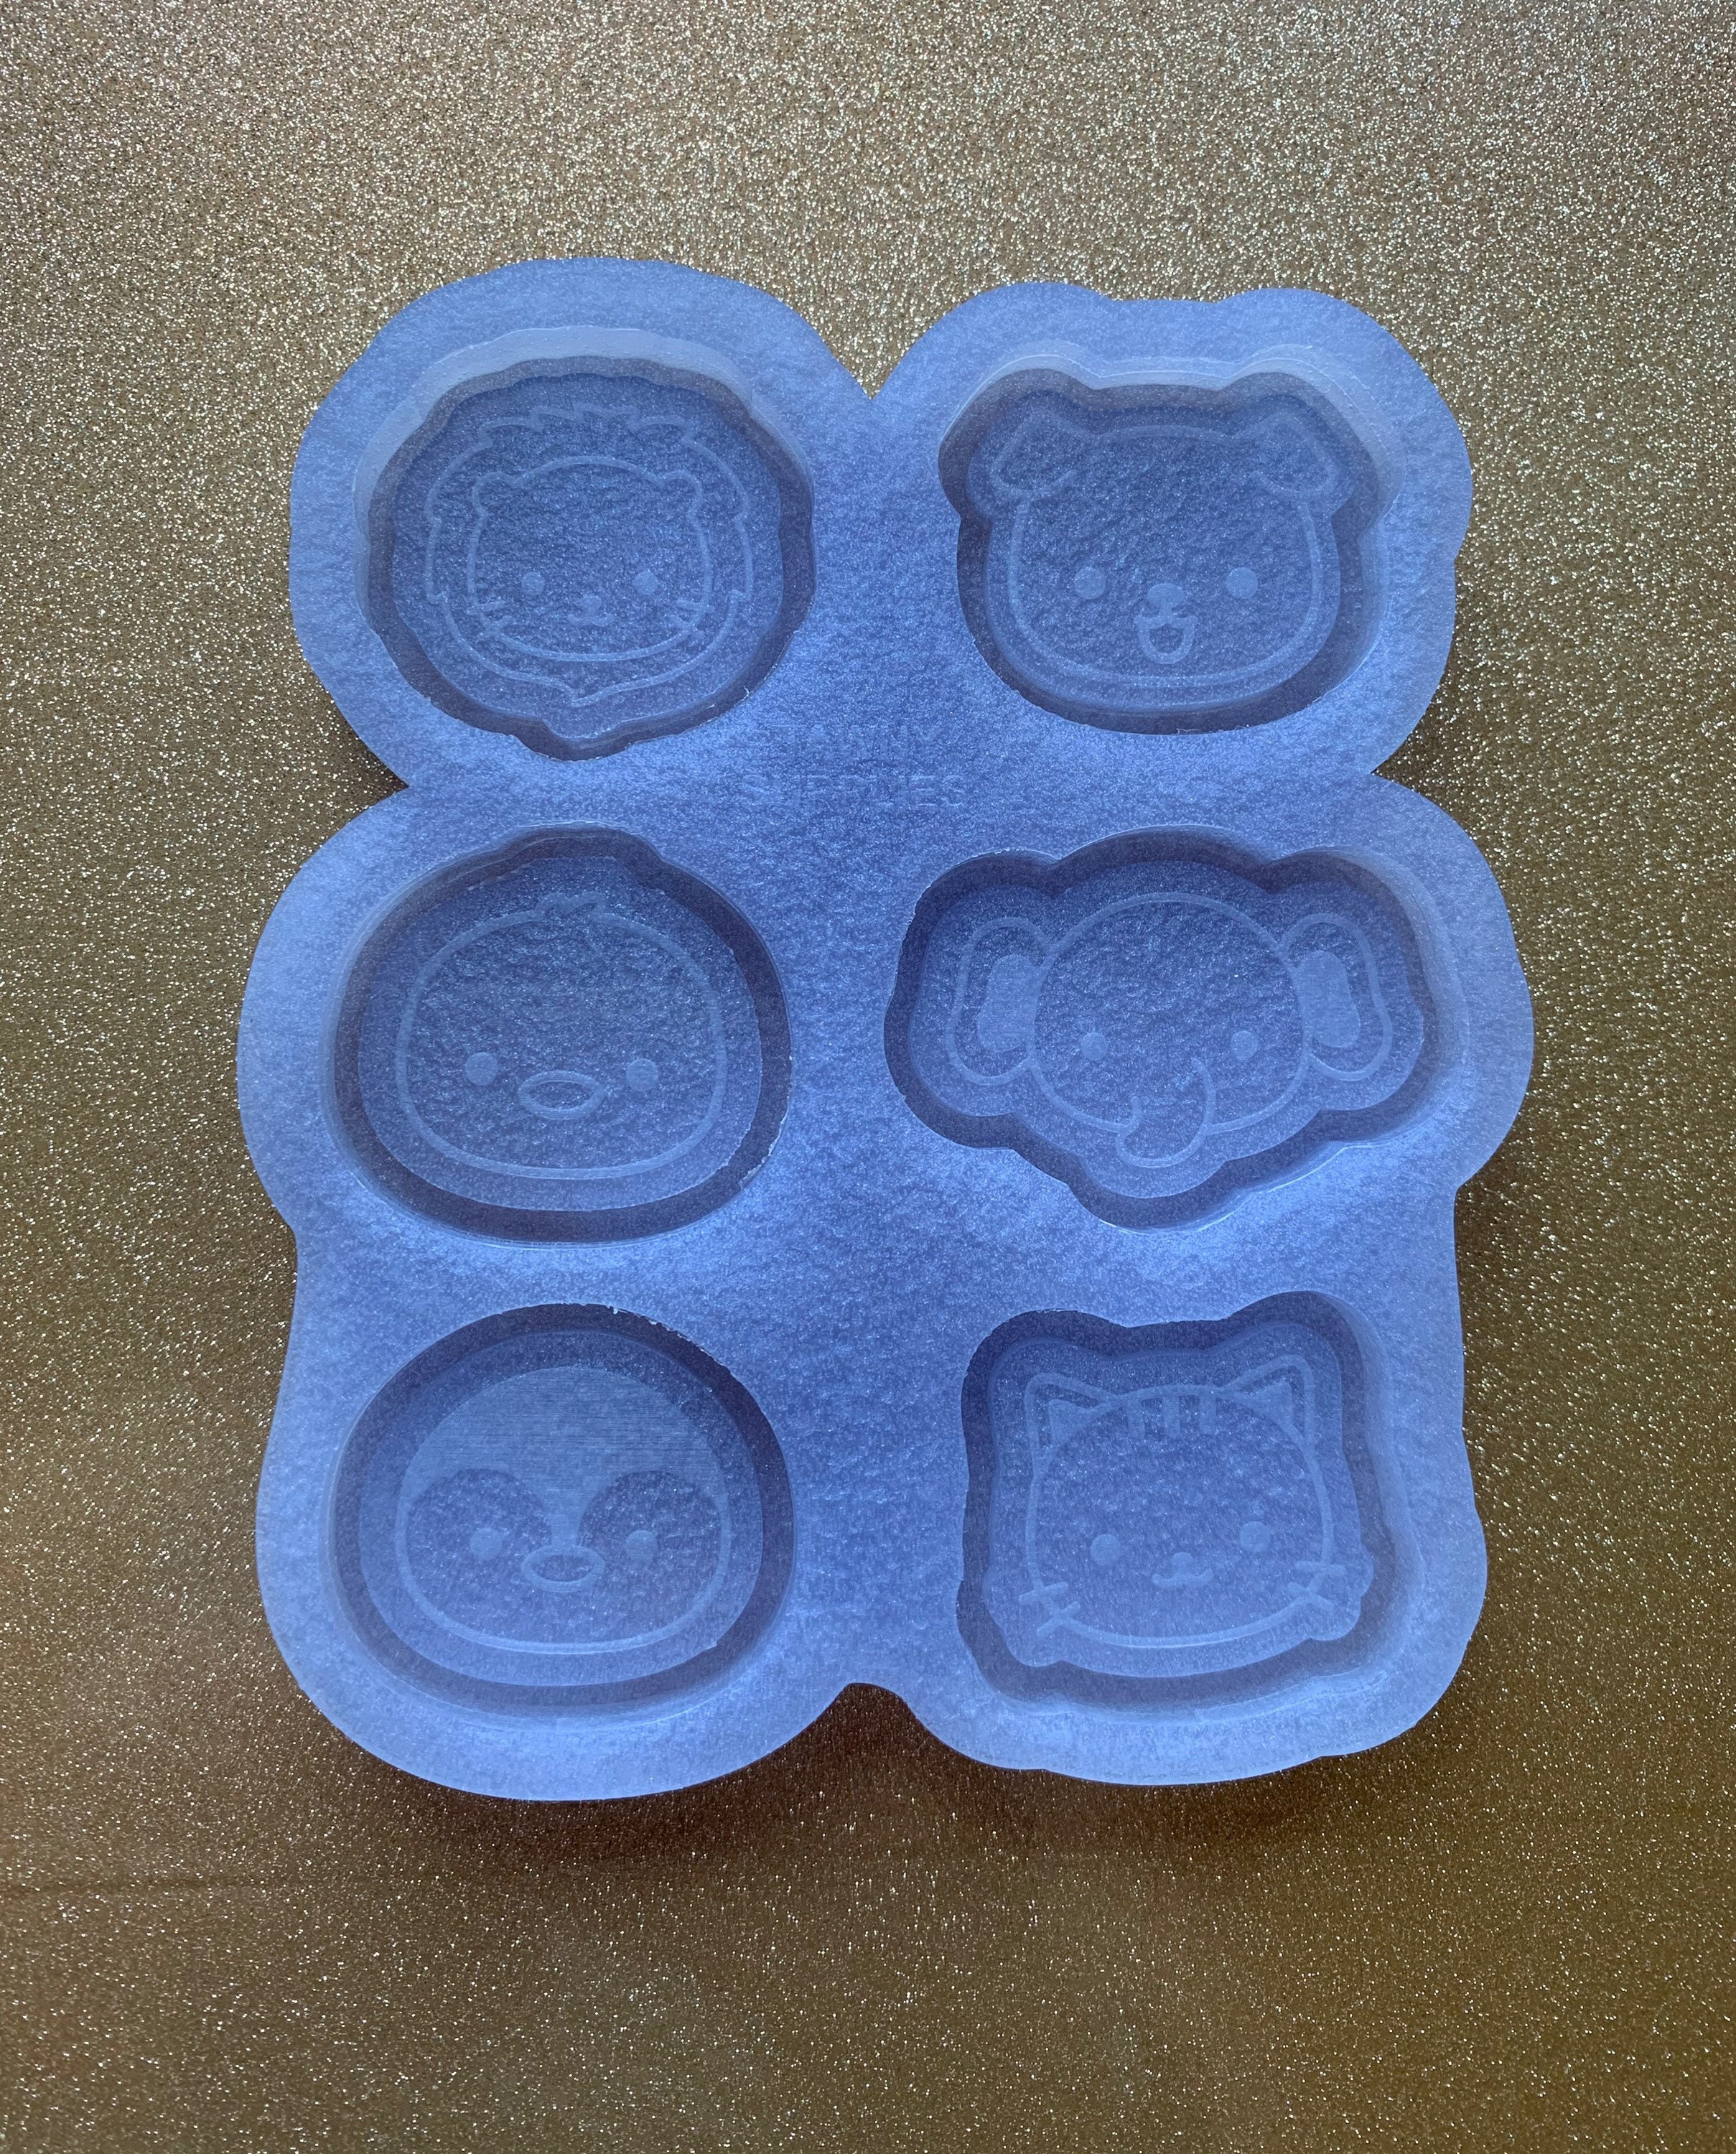 Resin Shaker Mold : Japan kawaii lucky charm , cute resin silicone mould ,  resin craft supplies